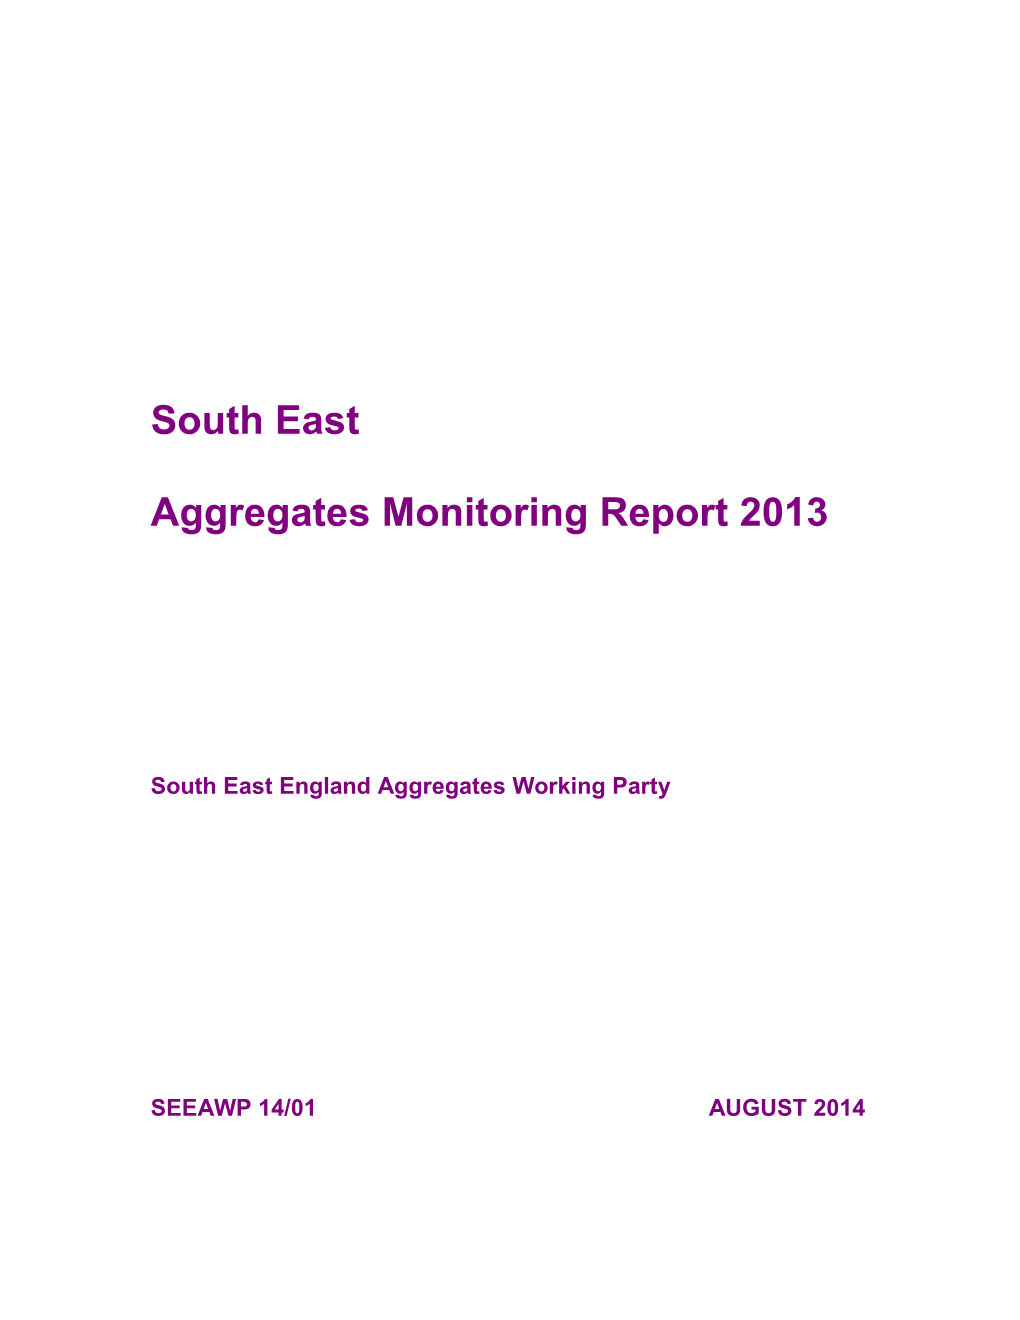 South East Aggregates Monitoring Report 2013